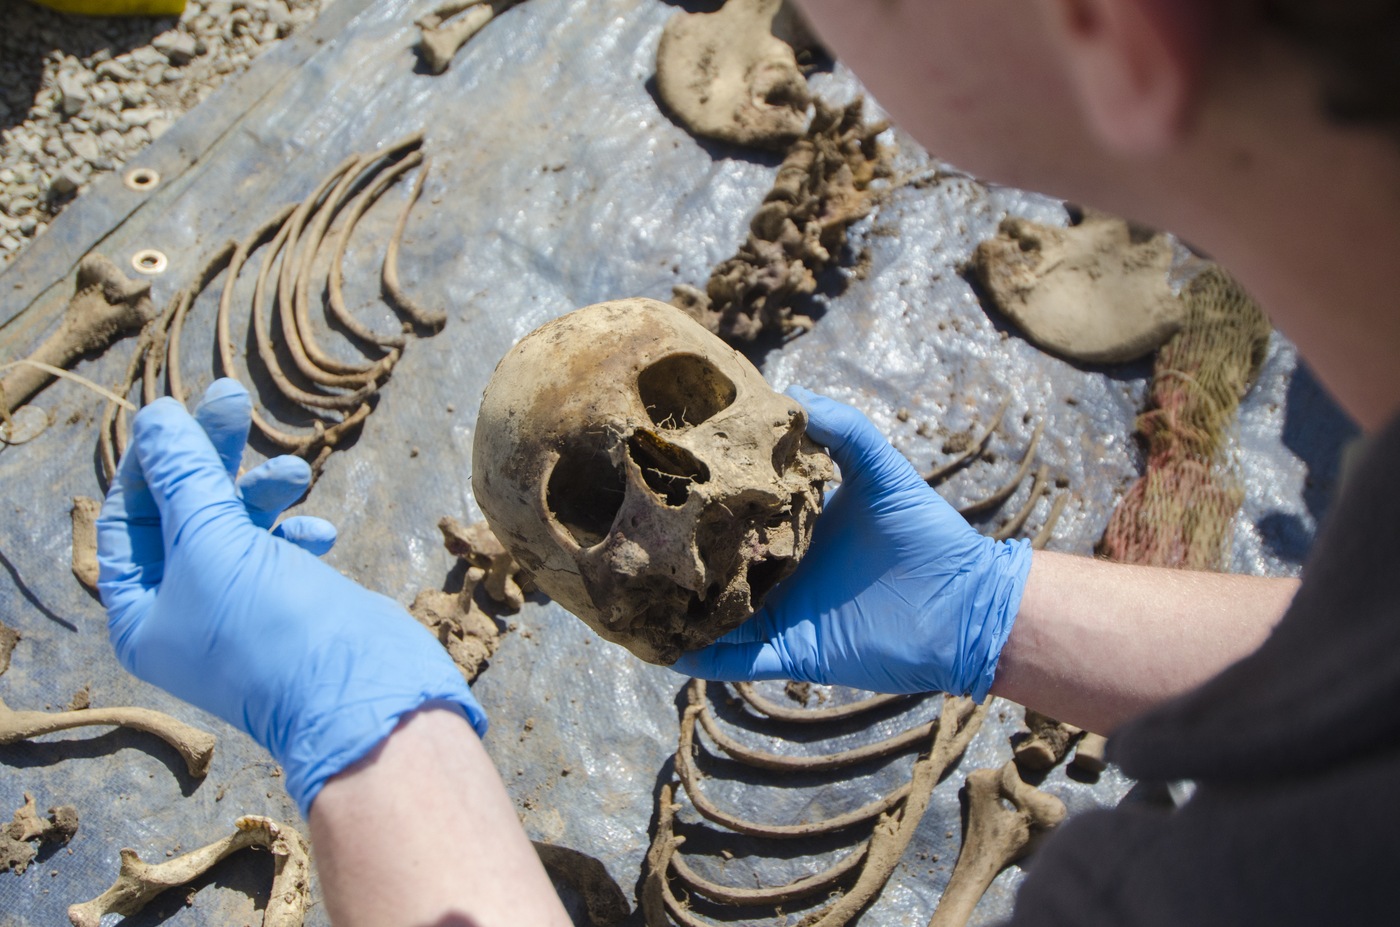 An FBI Evidence Response Team member examines a recovered skull at the Anthropology Research Center in Knoxville, Tennessee, during the Human Remains Recovery course in March 2018.